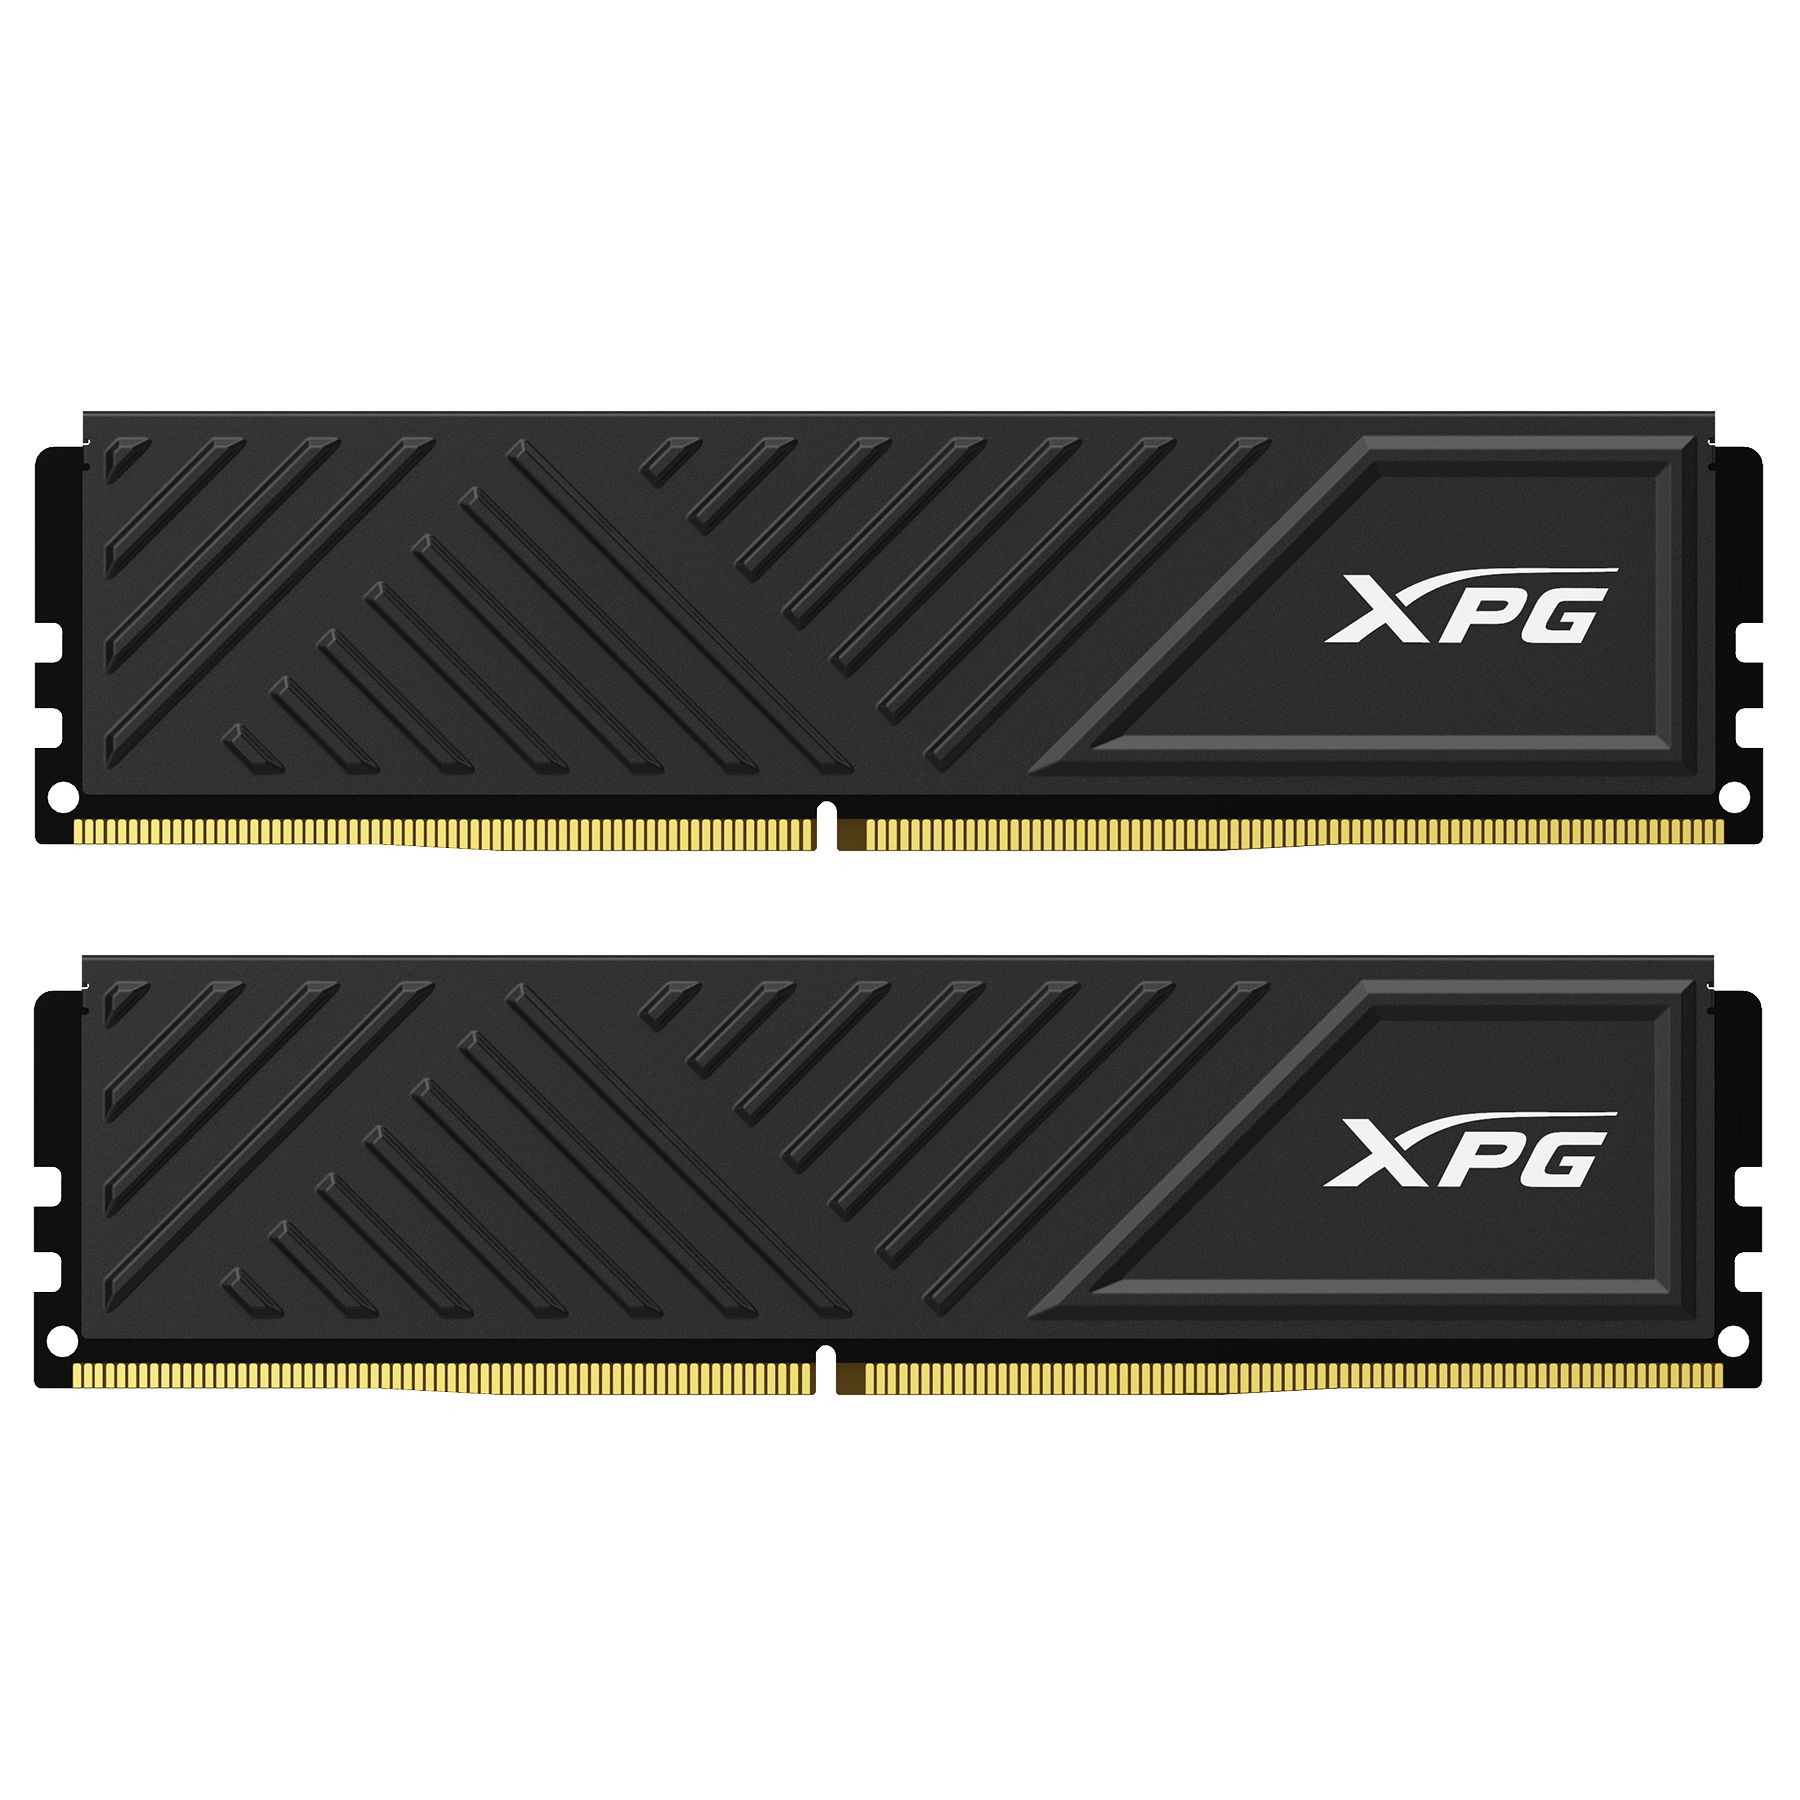 Memory capacity  16 GB Memory modules  2 Form factor  DIMM Type  DDR4 Memory speed  3600 MHz Clock speed  28800 MB/s CAS latency  CL18 Memory timing  18-22-22 Voltage  1.35 V Cooling  radiator Module profile  standard Module height  34 mm More features  overclocking series XMP_1